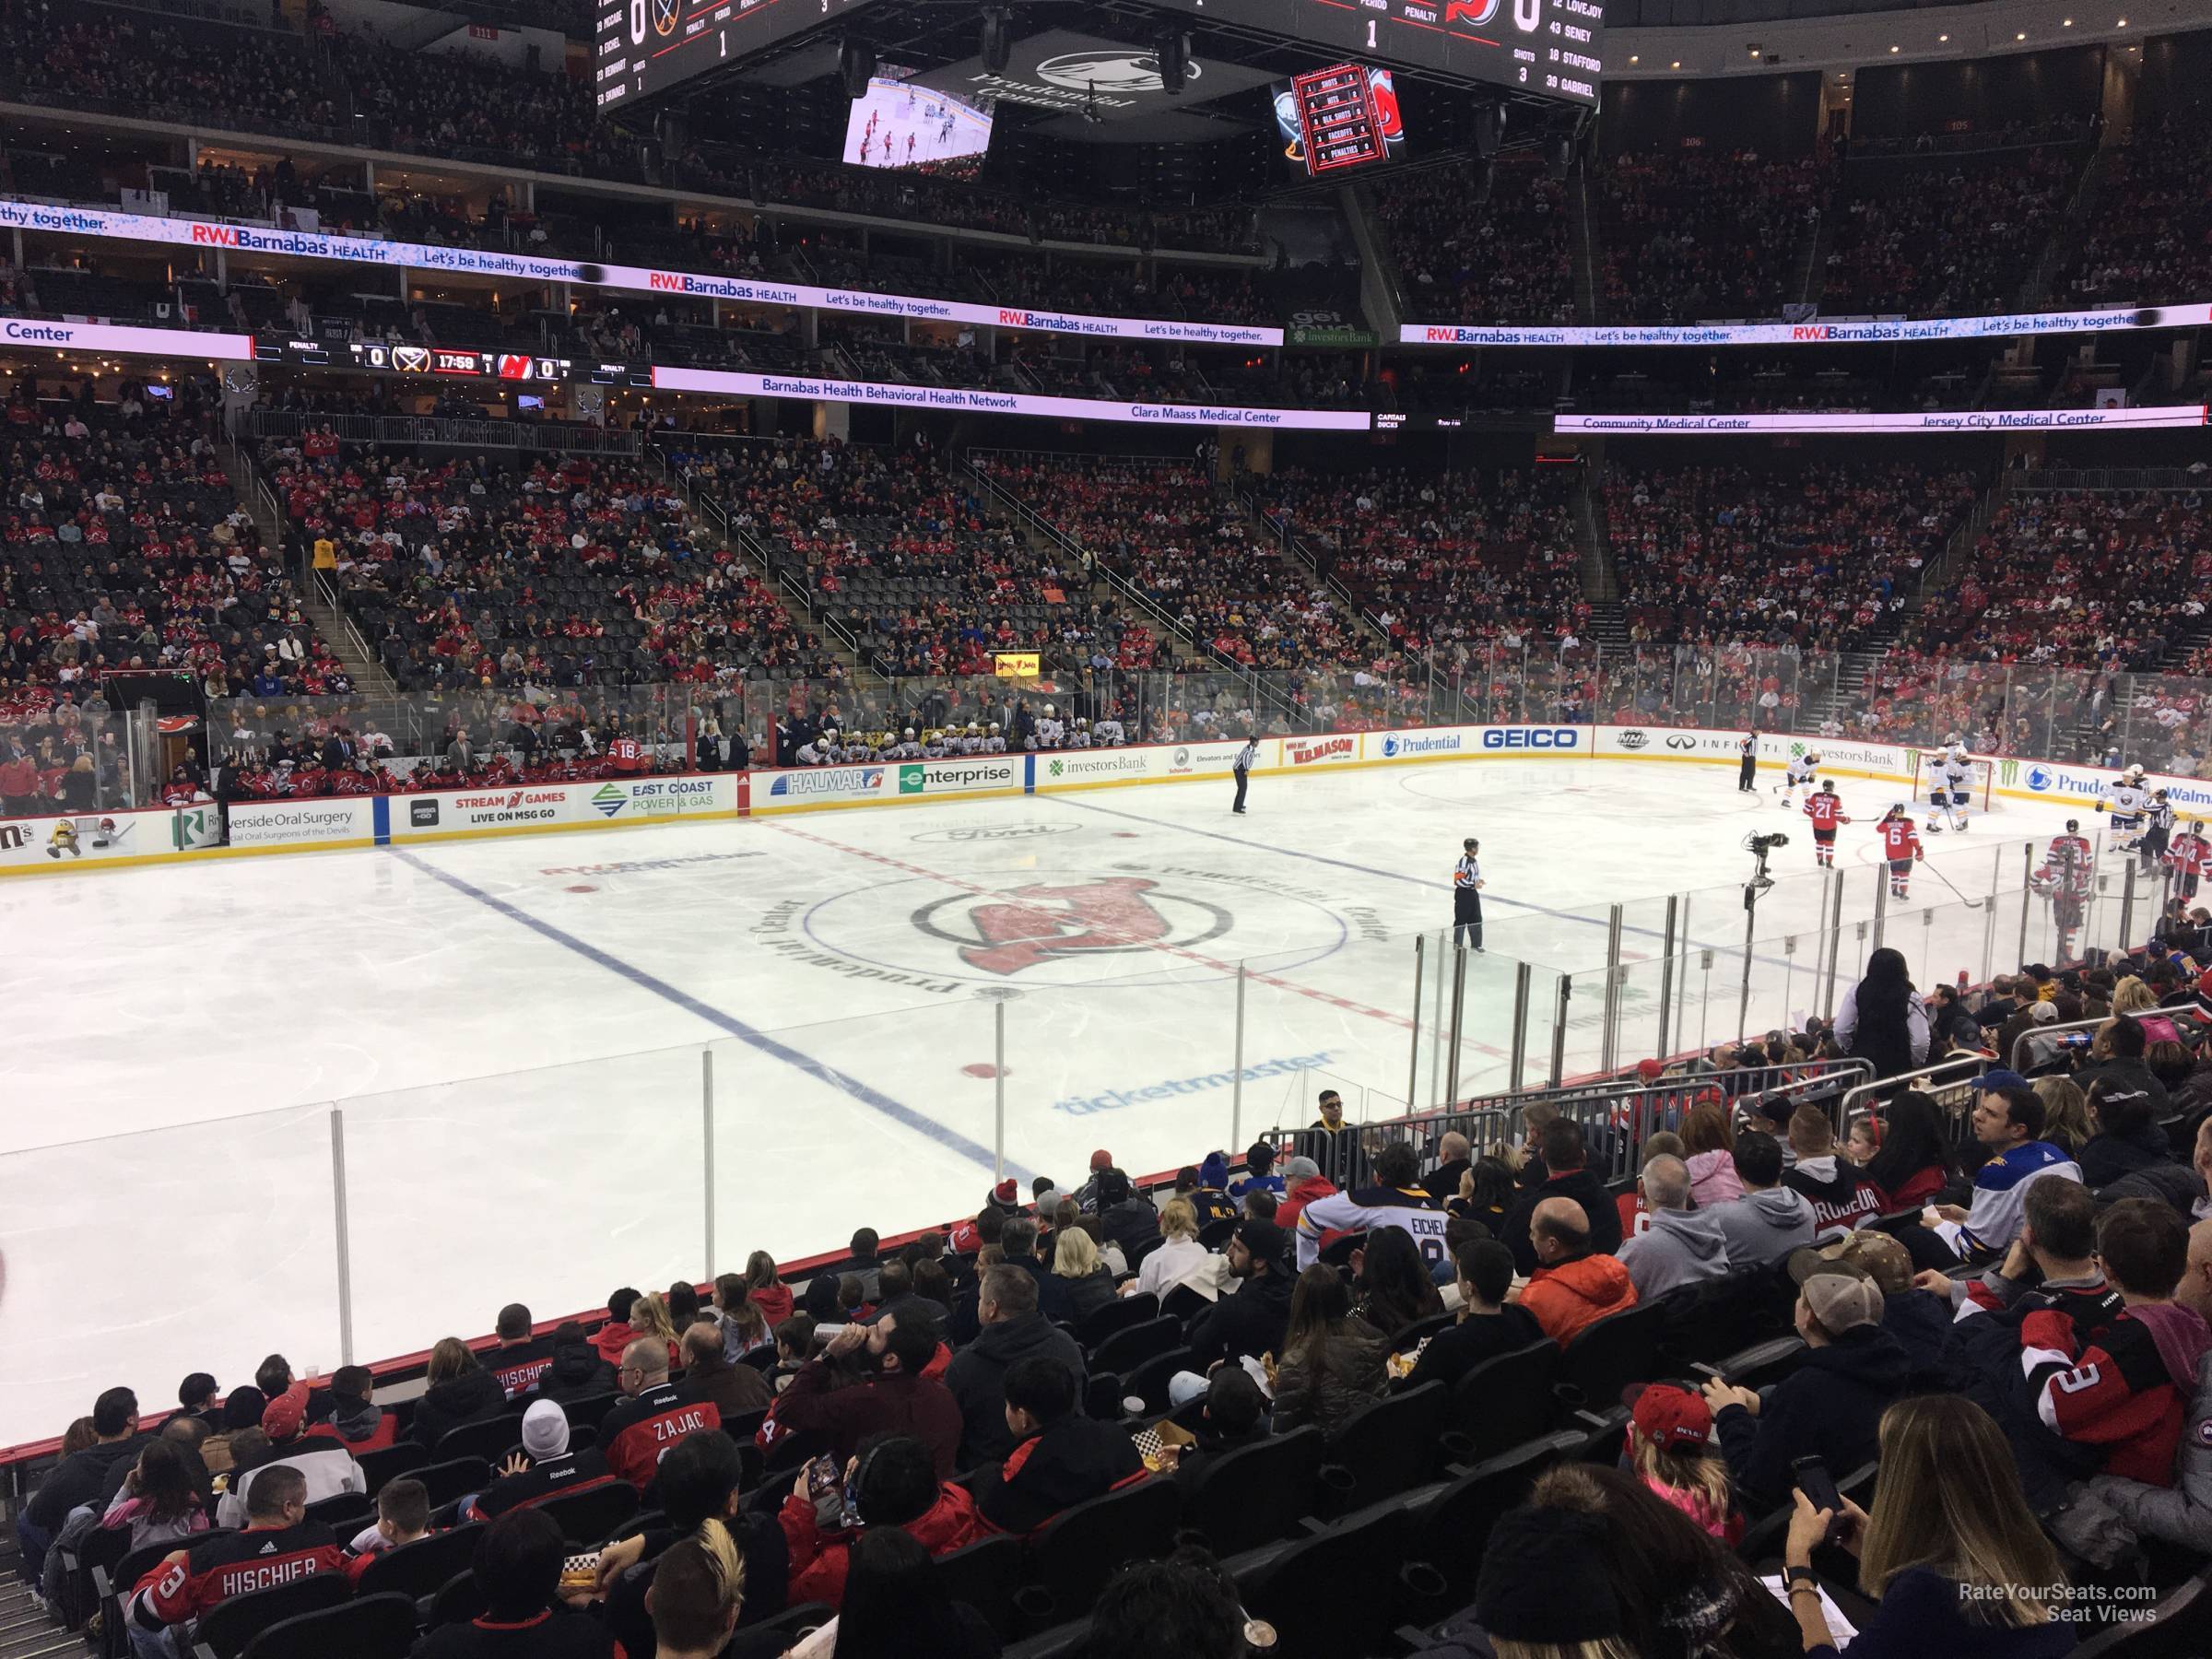 Section 15 at Prudential Center 